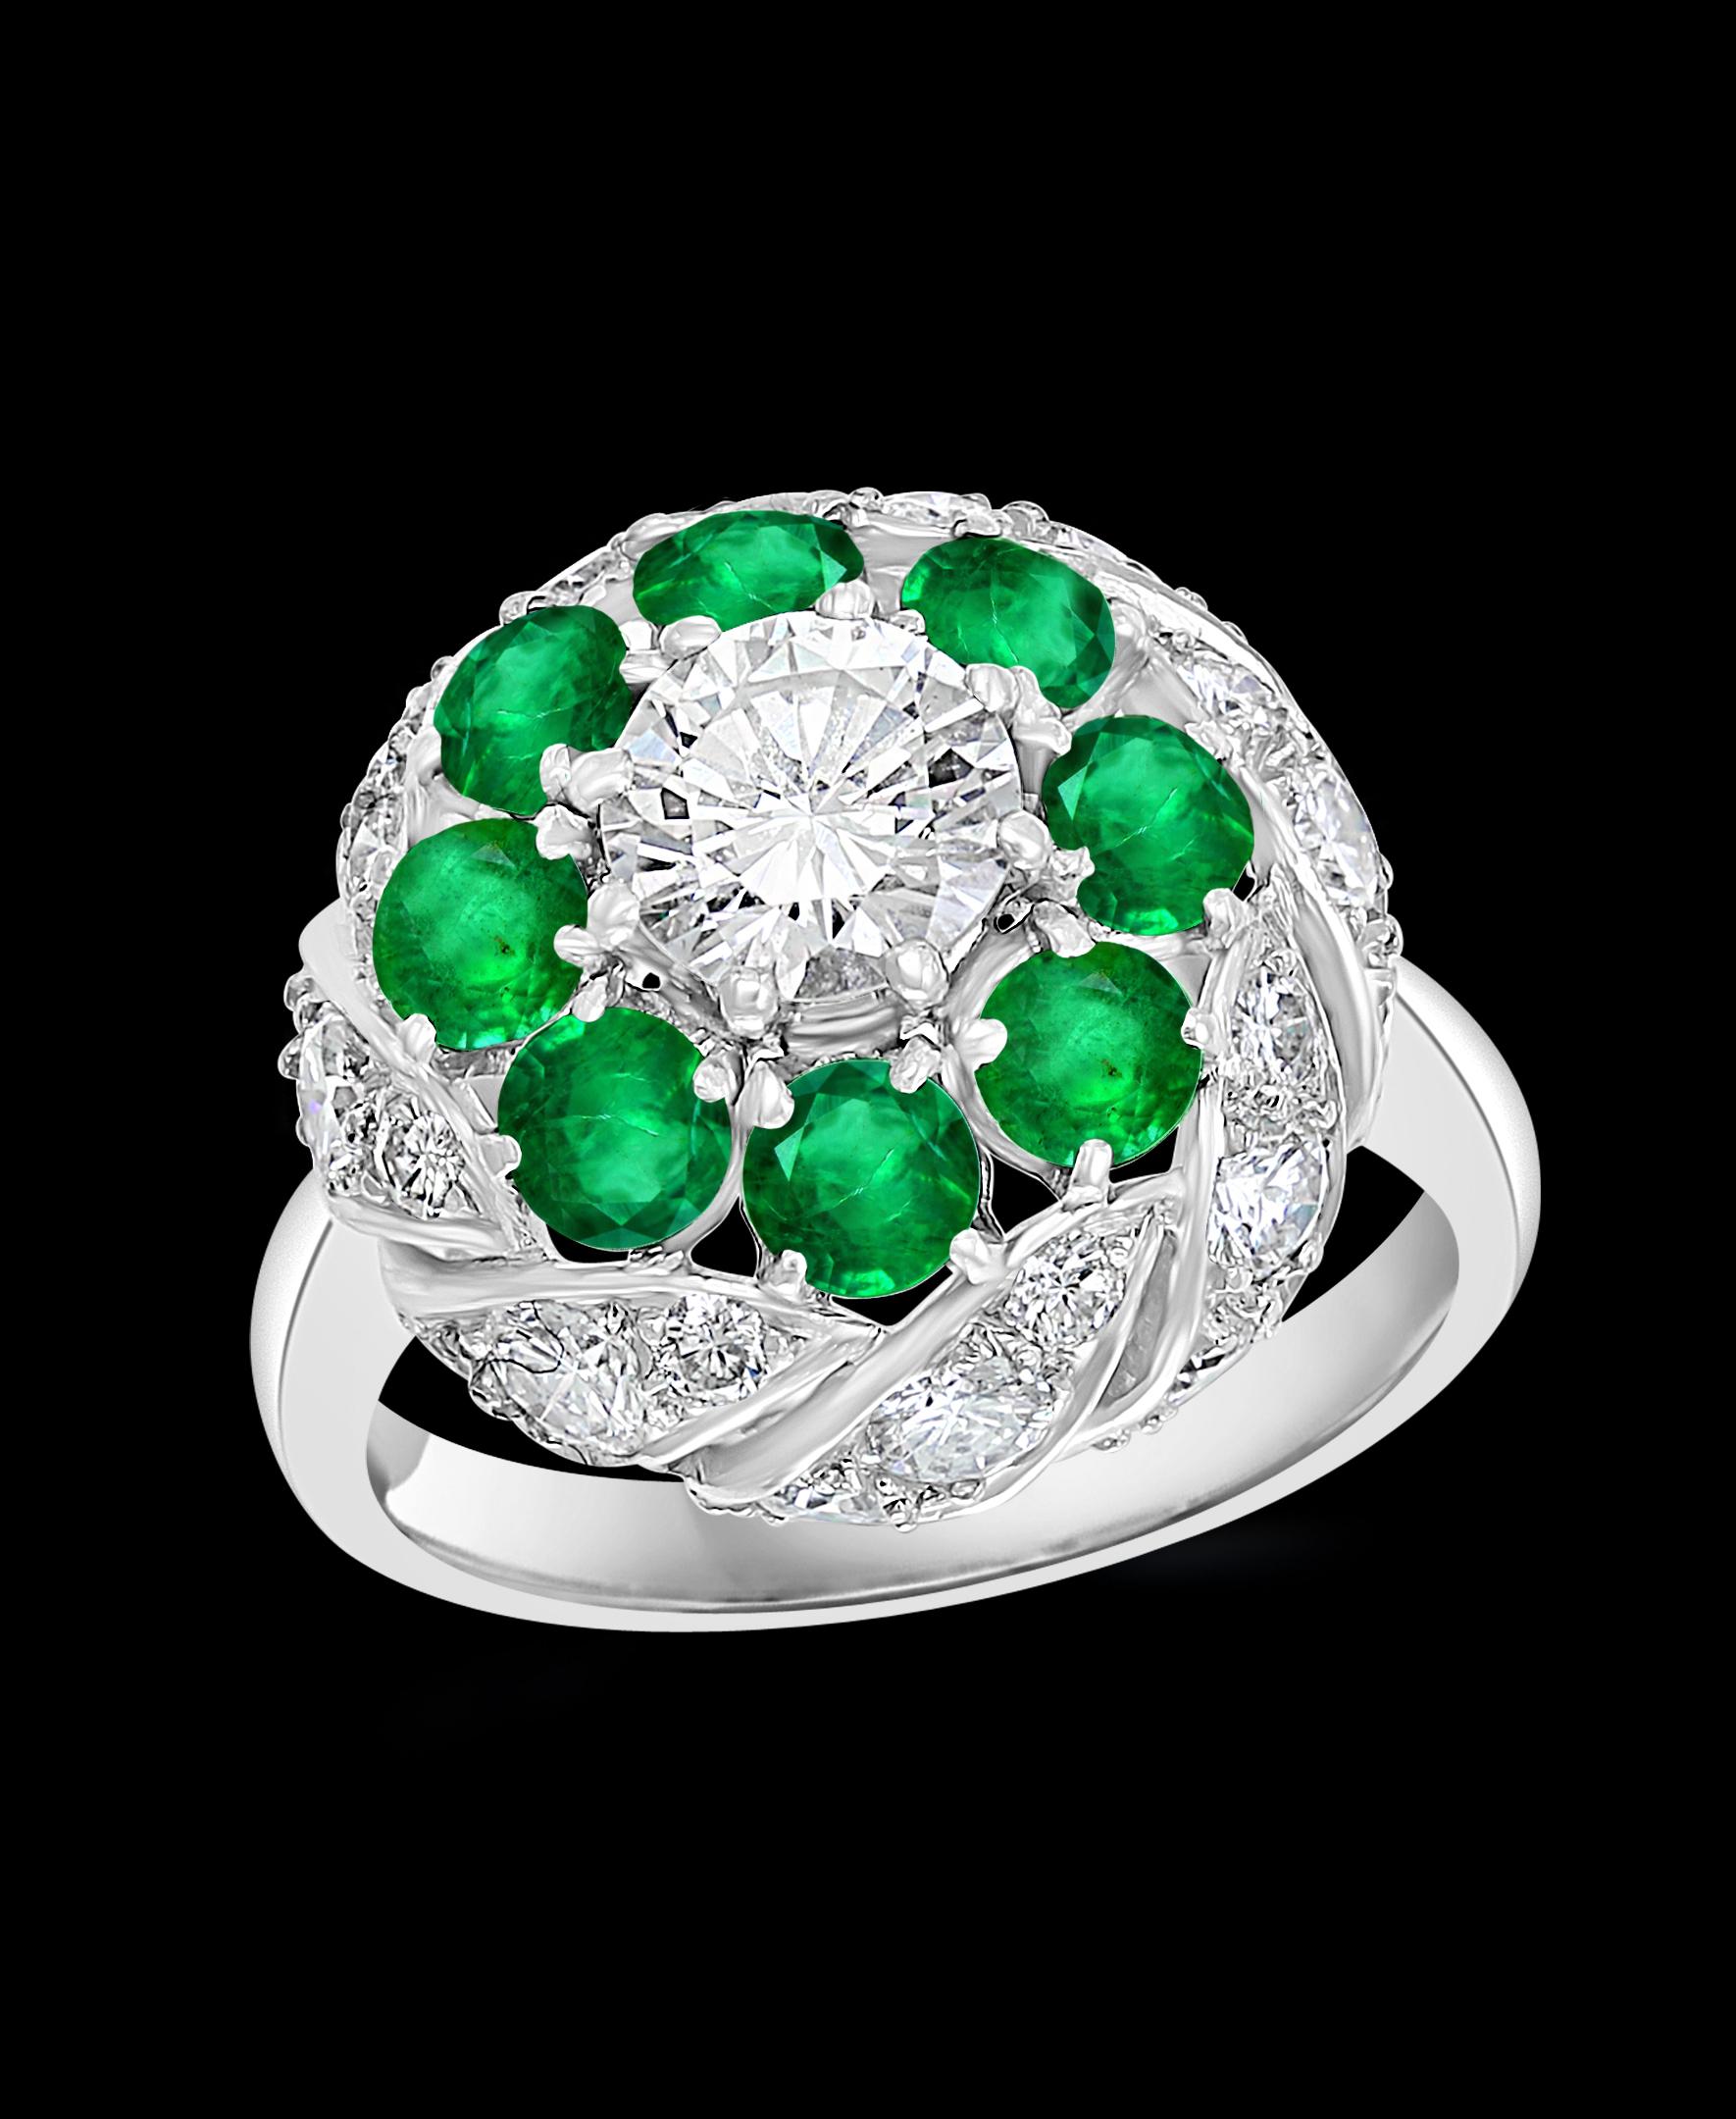 Antique Victorian Emerald & Solitaire Diamond Ring In Platinum Estate Size 5
Old Treasure 
Solitaire Approximately  1 Ct Brilliant Round Diamond in the C enter.
Surrounded by round shape Emeralds , each approximately 10 pointer .
Total weight of the